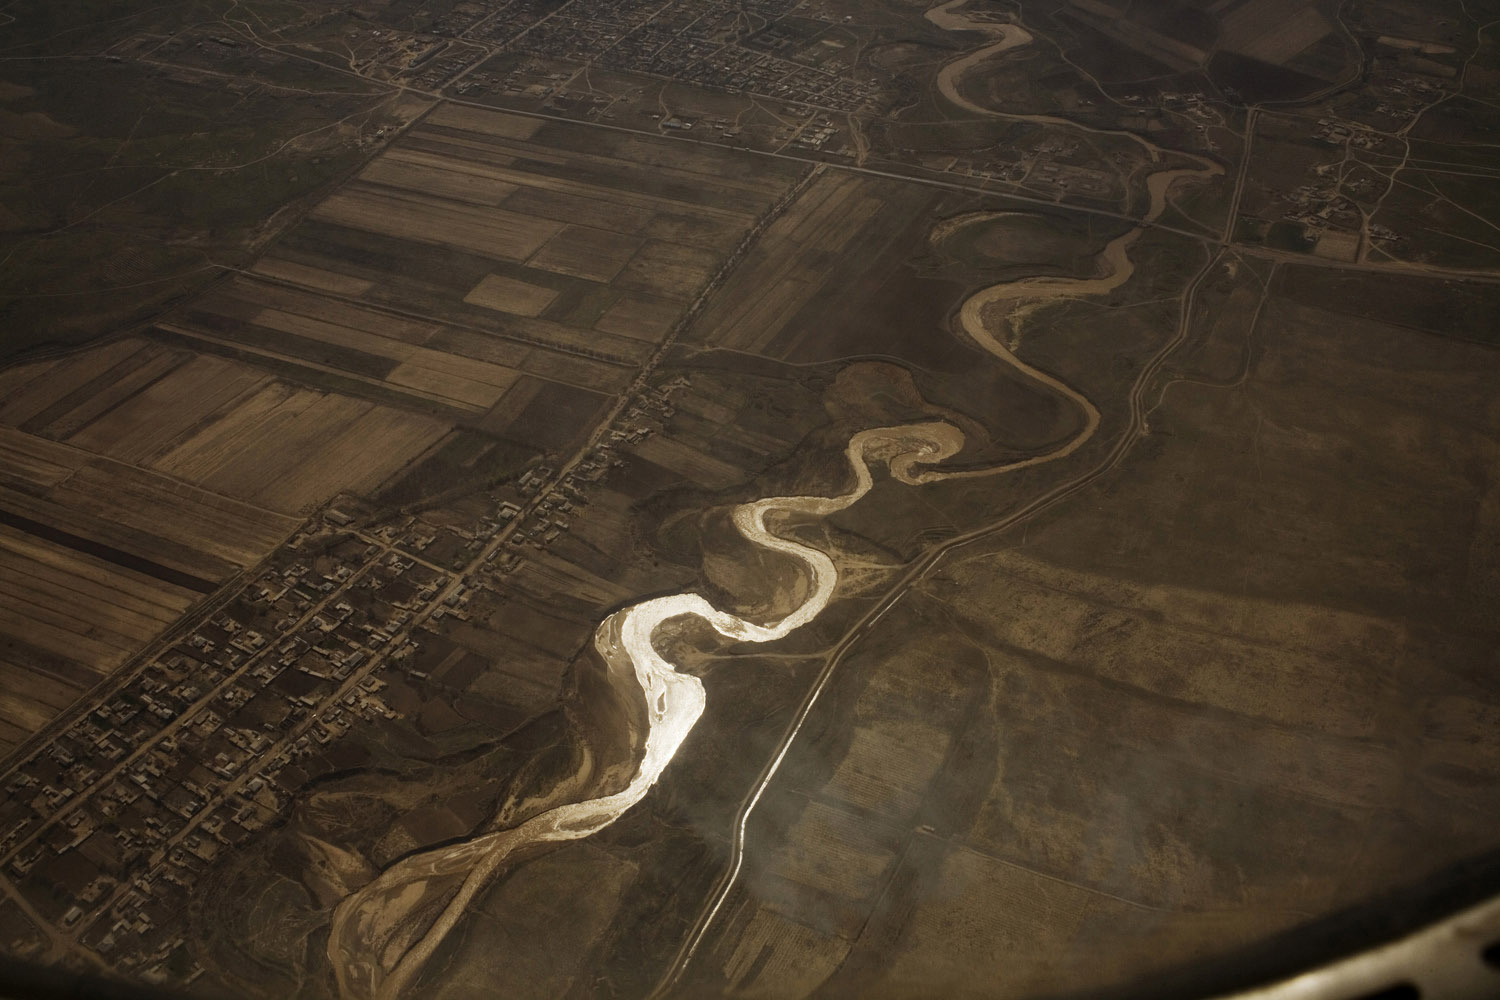 The Syr Darya river near Tashkent, viewed through an airplane window. The river feeds the North Aral Sea, which has grown dramatically since the construction of a dam that now divides the Northern part of the sea (in Kazakhstan) from the southern part (in Uzbekistan).